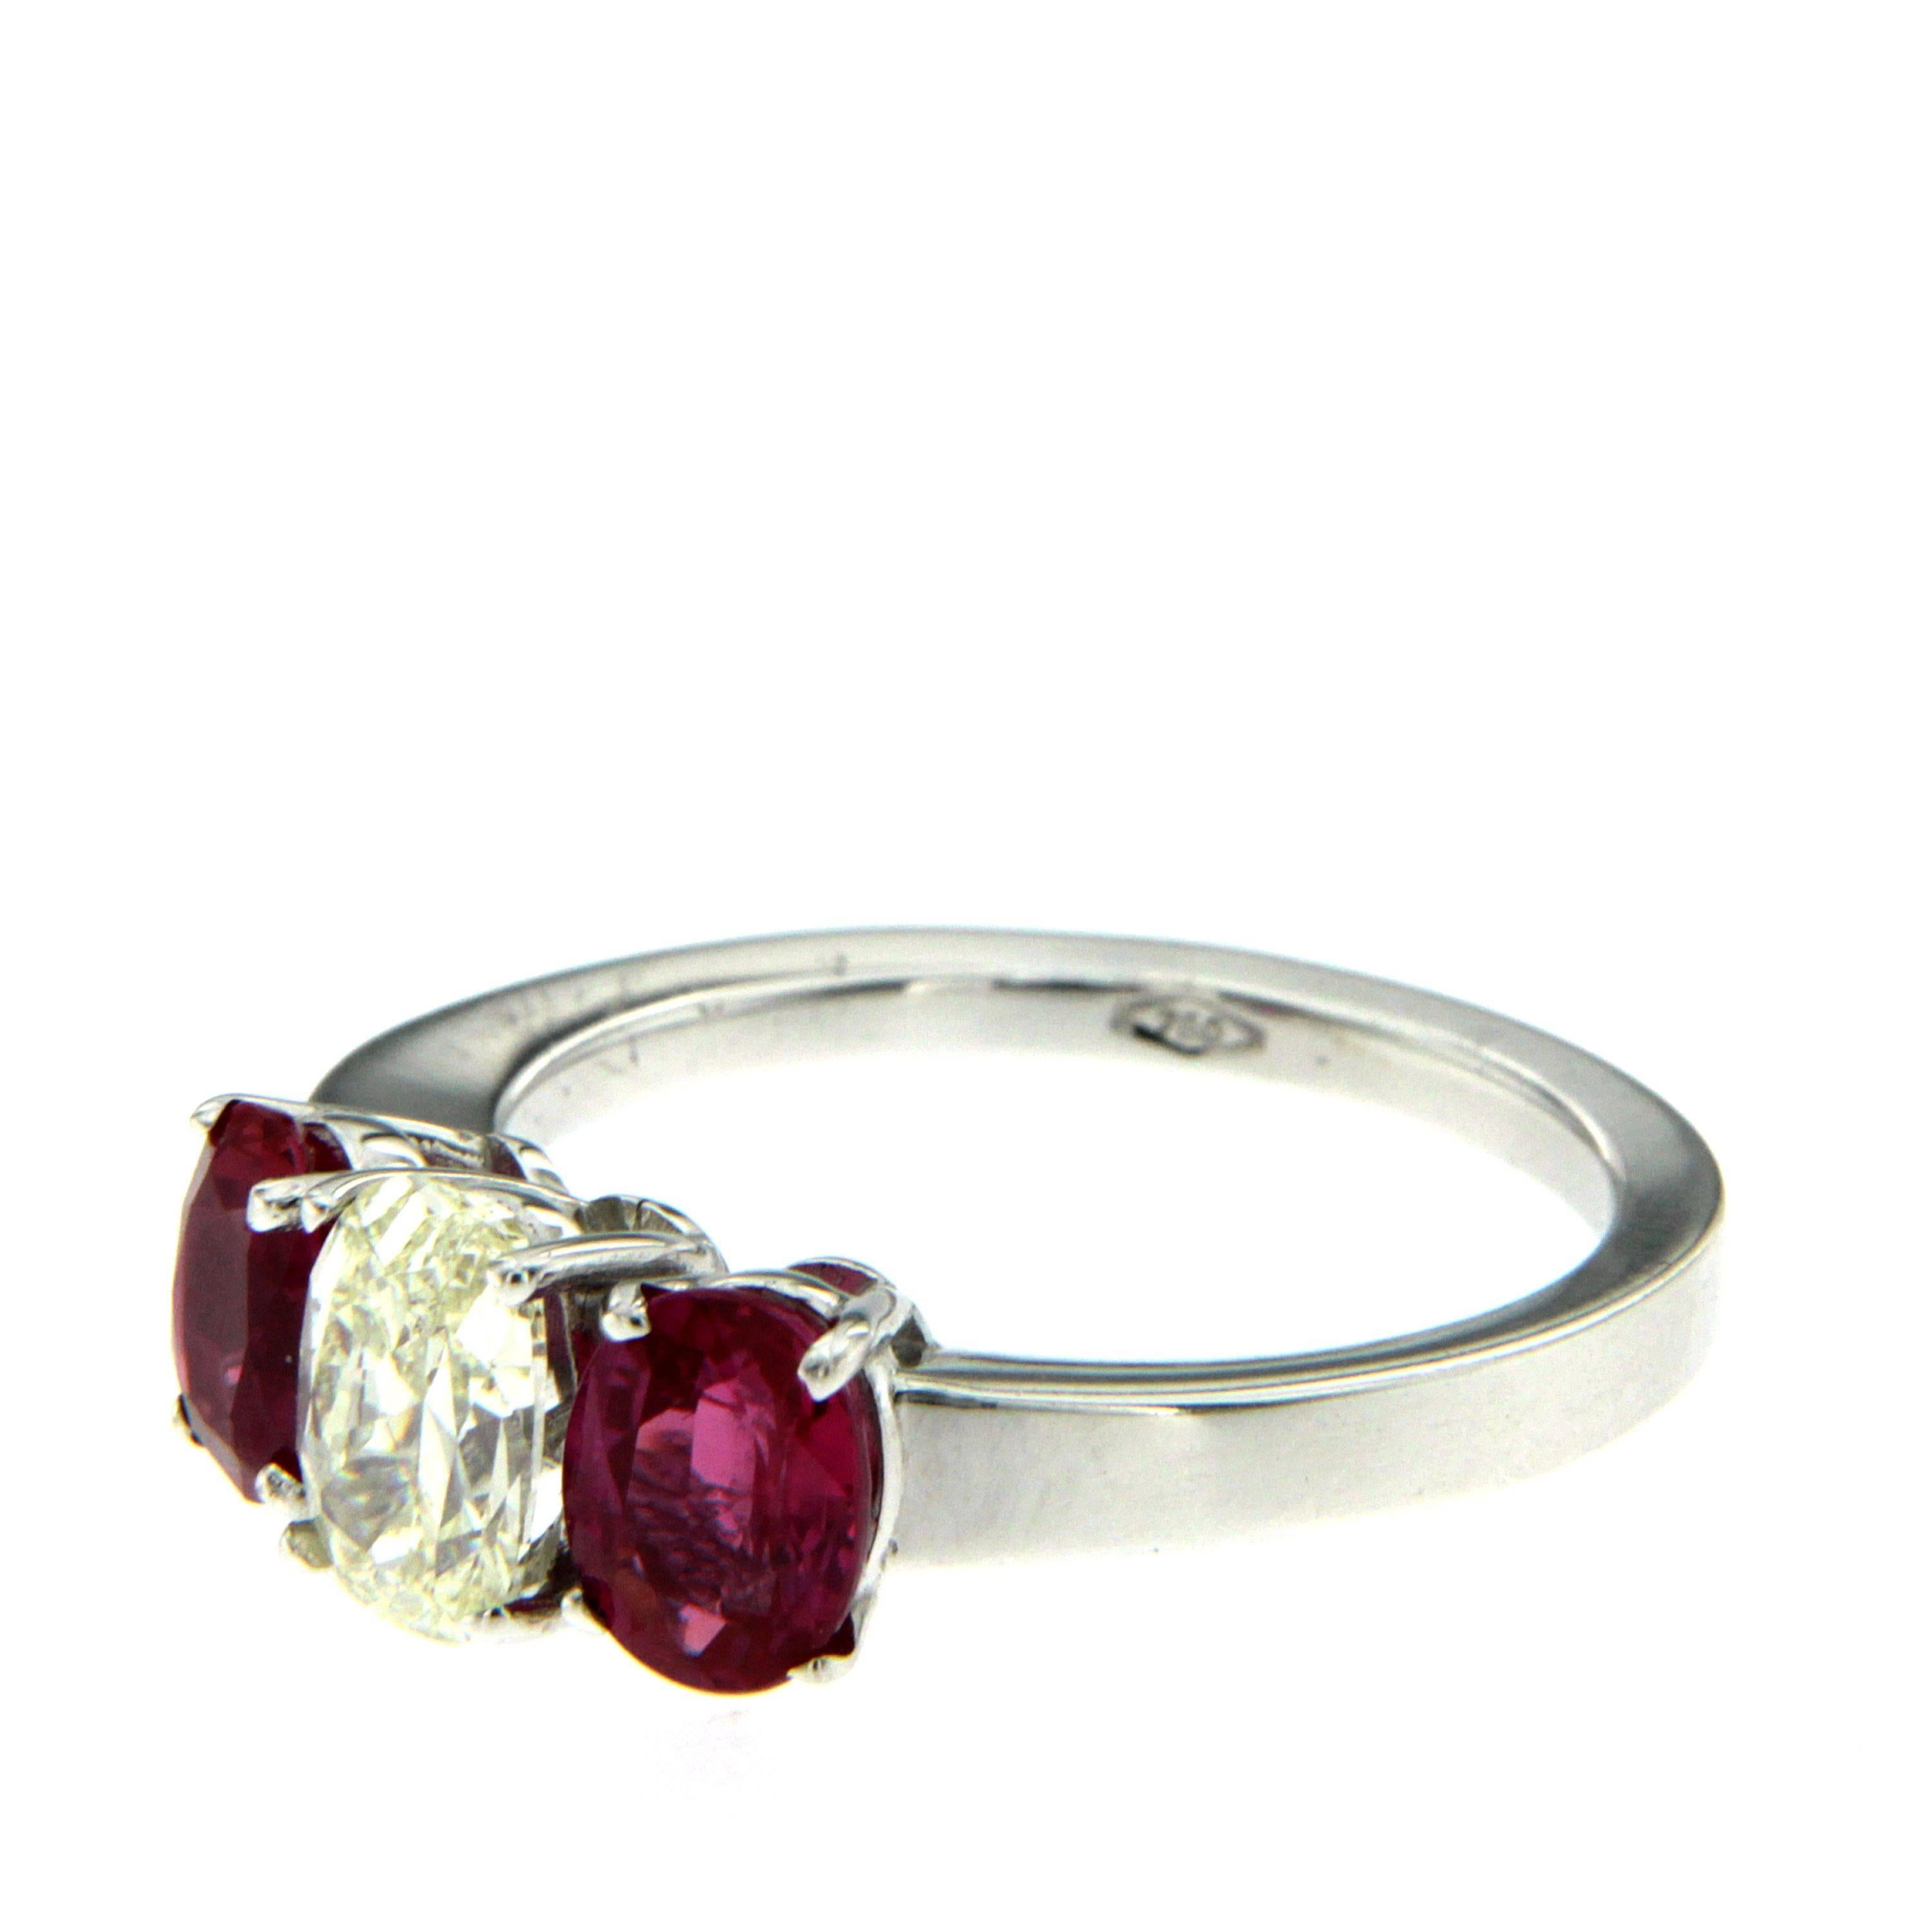 18k white Gold three stone ring containing one oval cut Diamond weighing 1.00 carat graded L color VVS2 clarity. The diamond is flanked by two oval shape mixed cut Rubies weighing 0.86 and 1.12 carats
Both rubies comes with an American Gemological